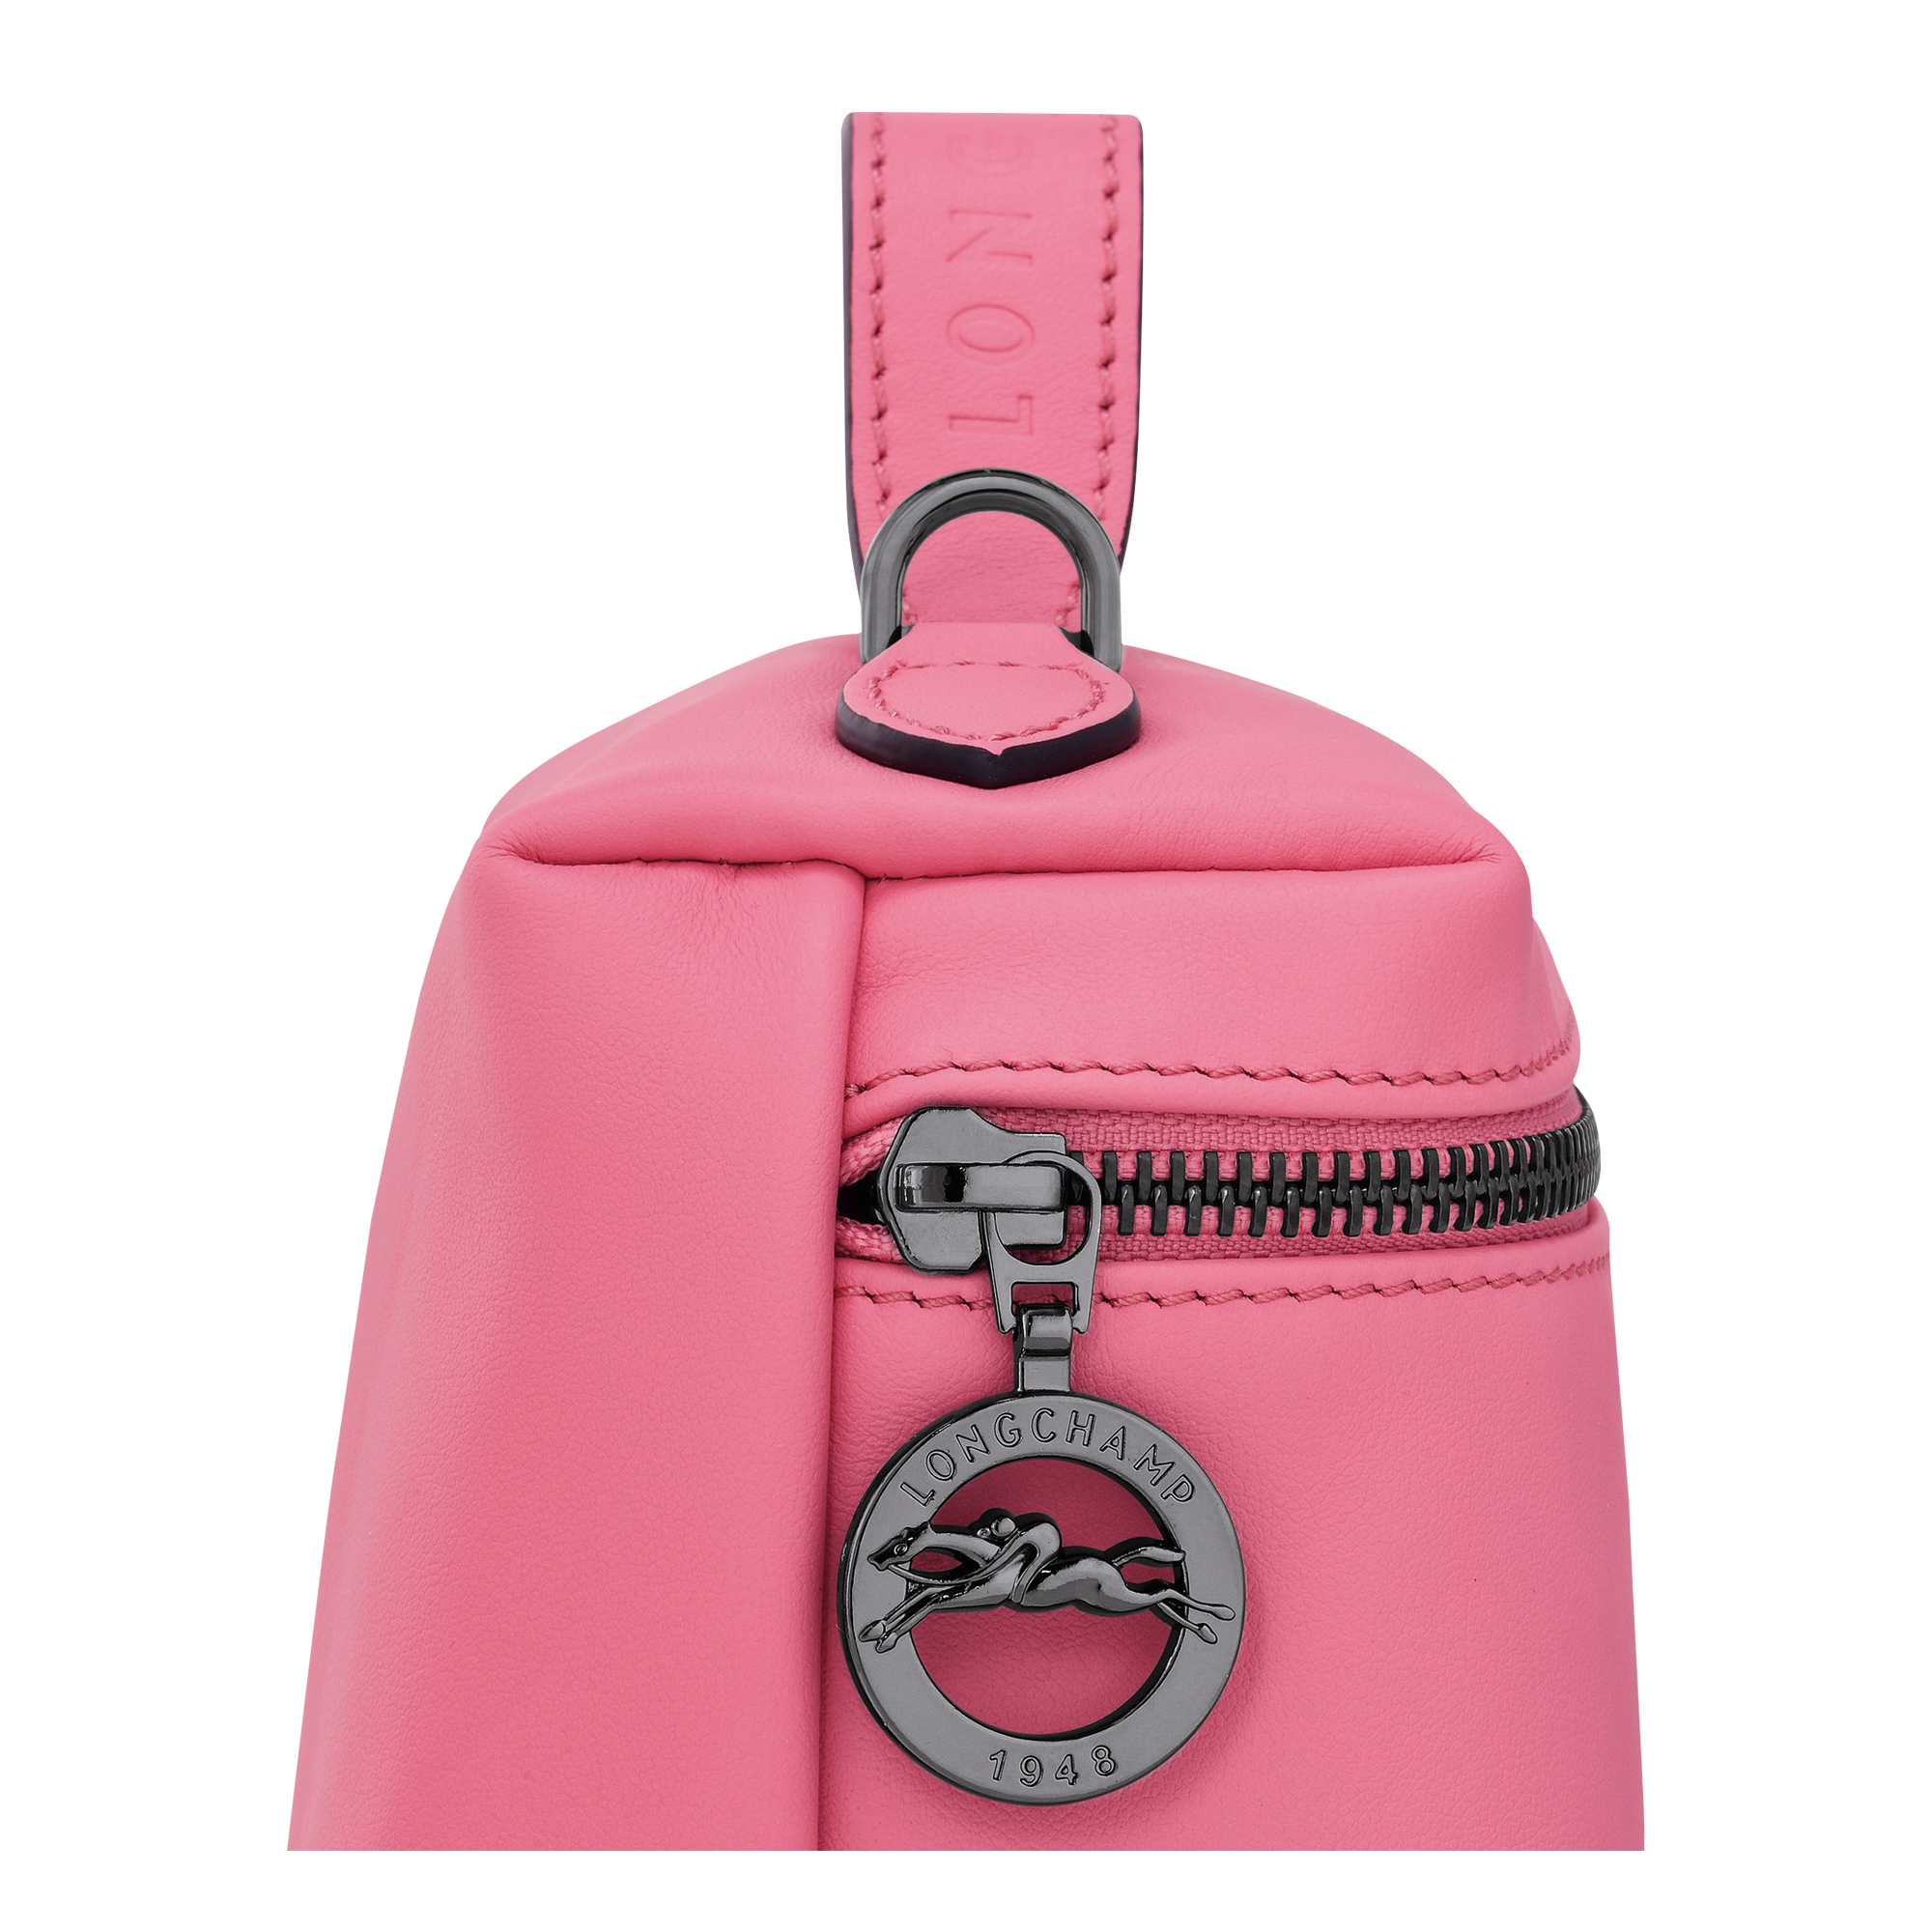 Longchamp Le Pliage Toiletry Case In Pinky